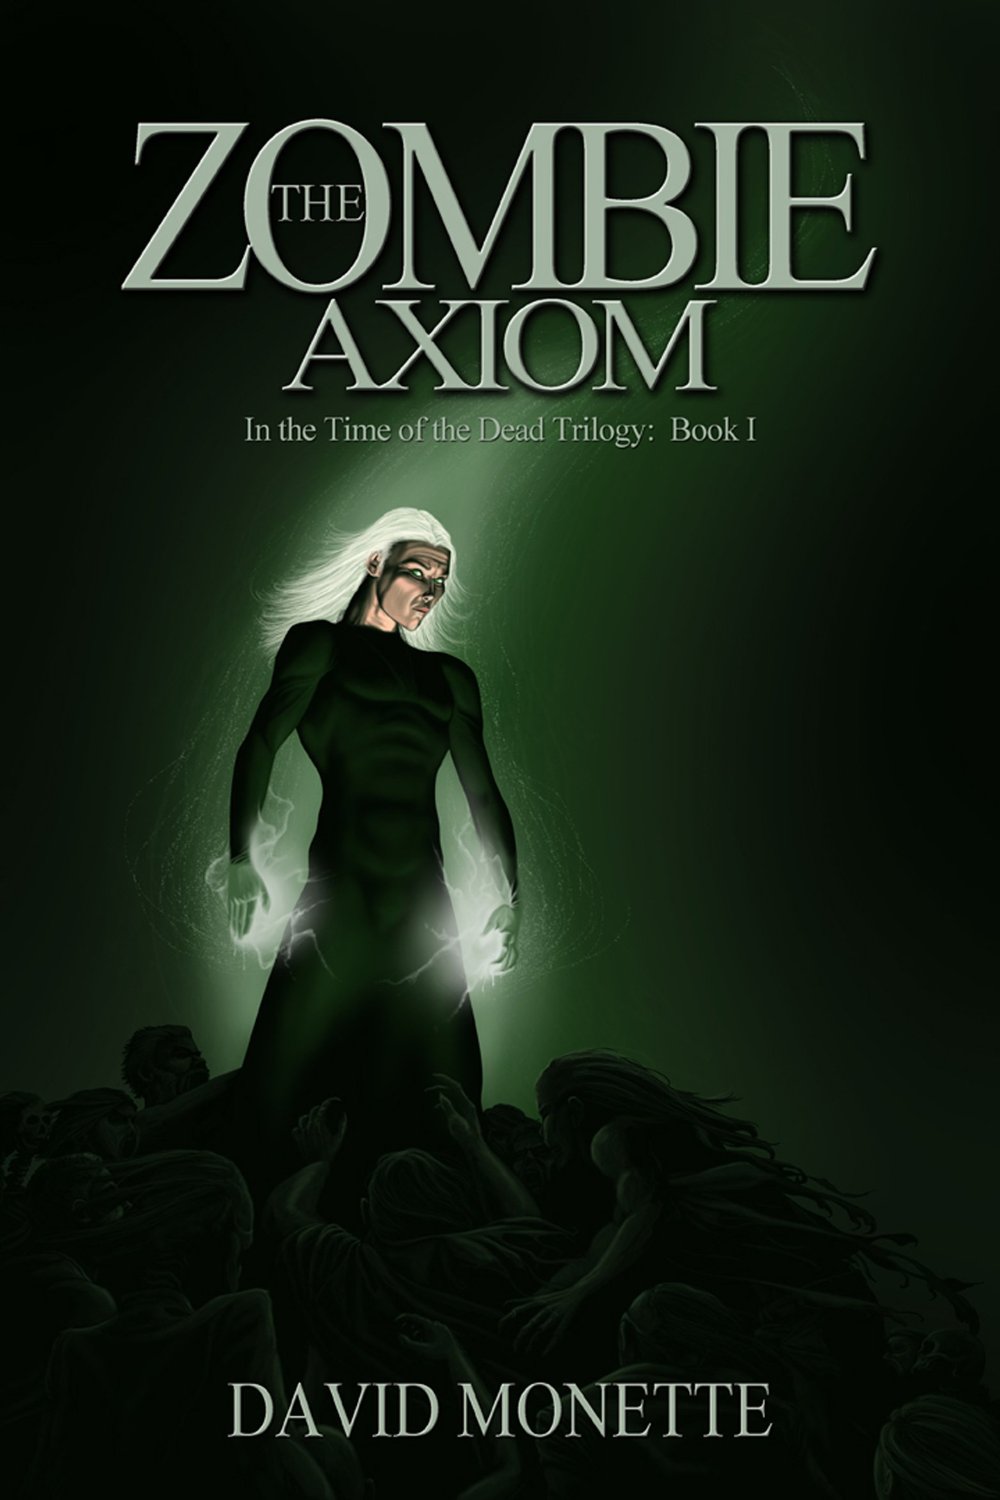 The Zombie Axiom by David Monette